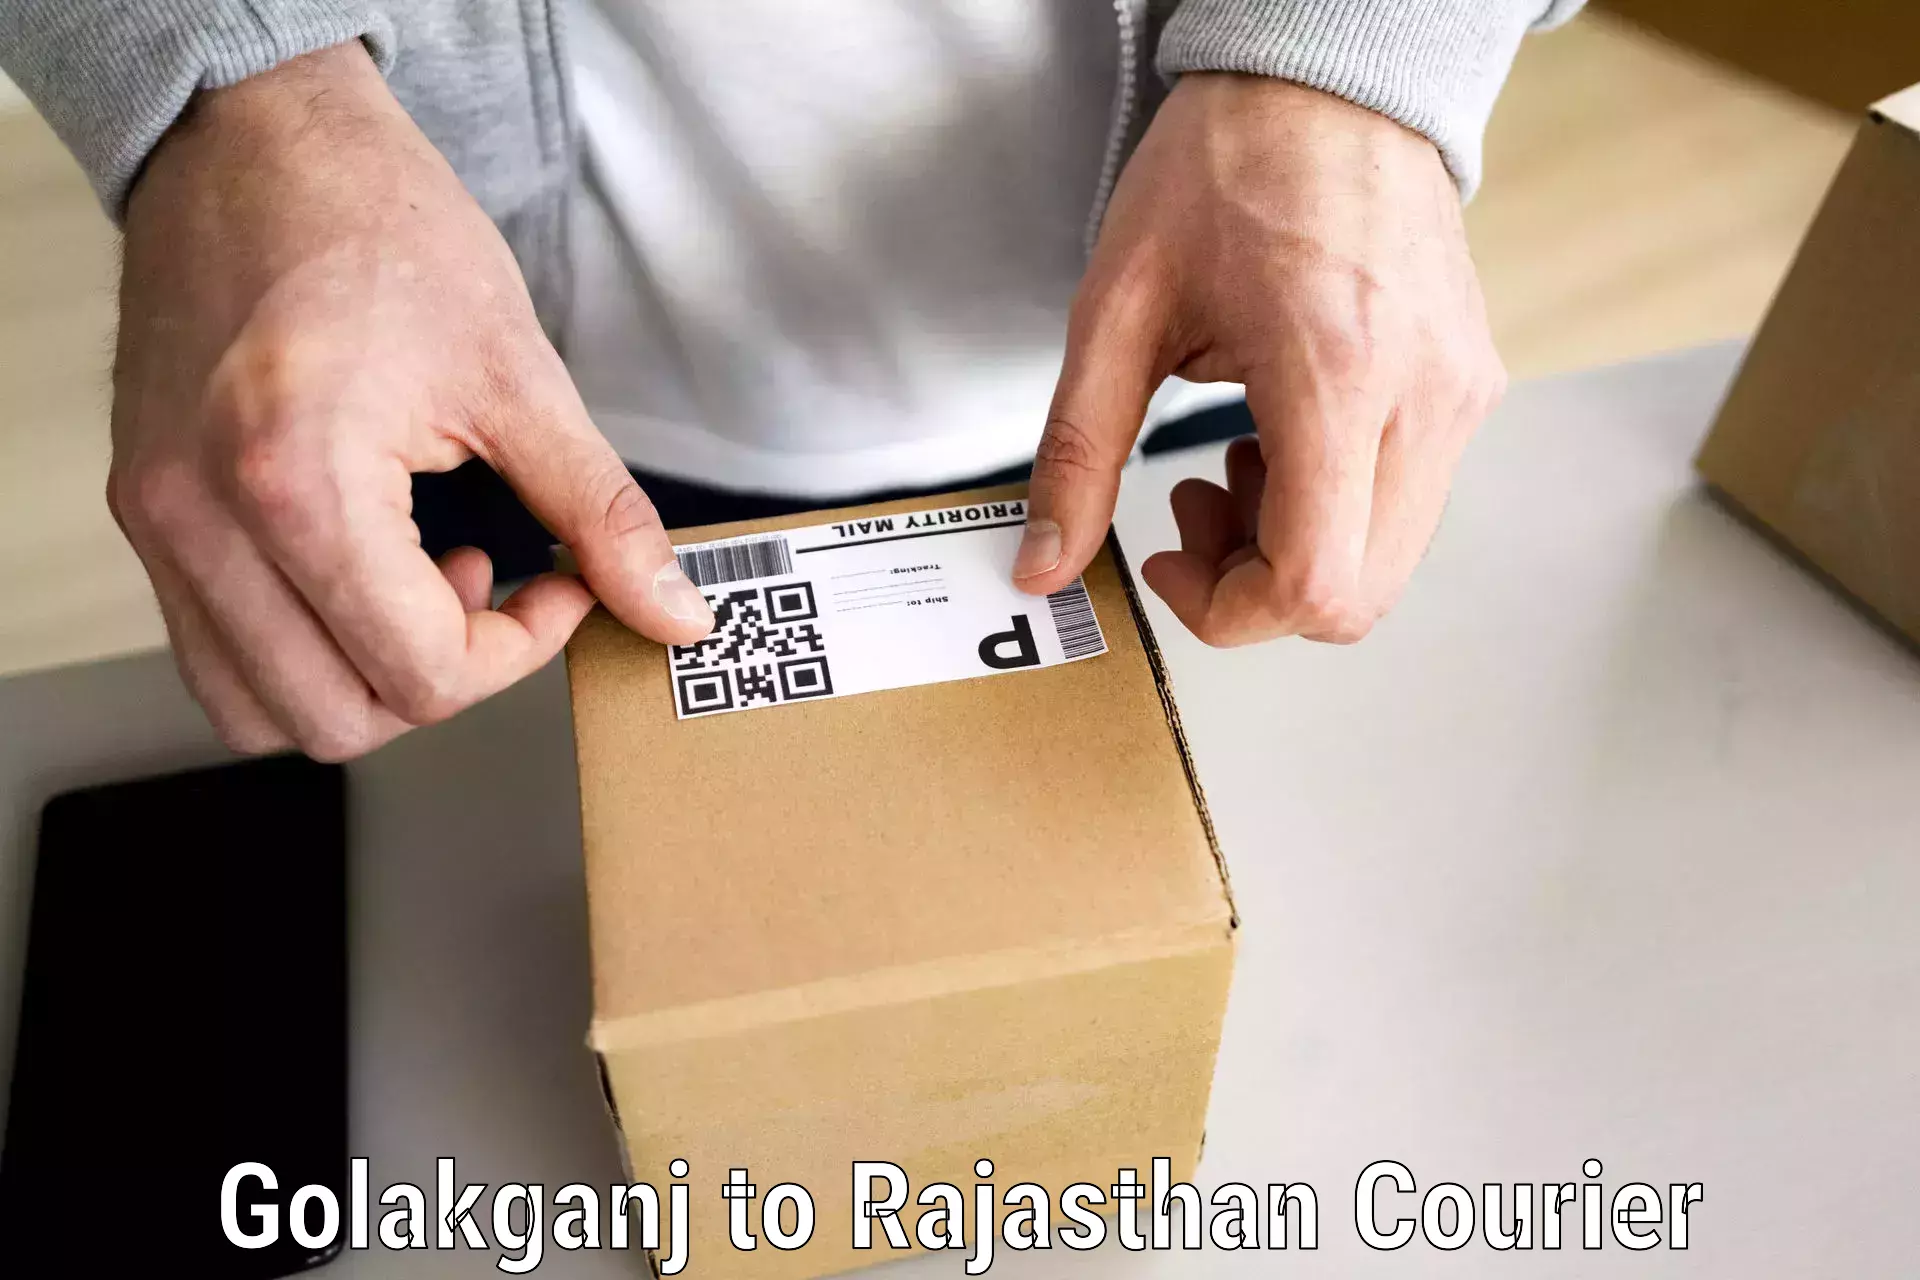 Quality relocation assistance Golakganj to Sultana